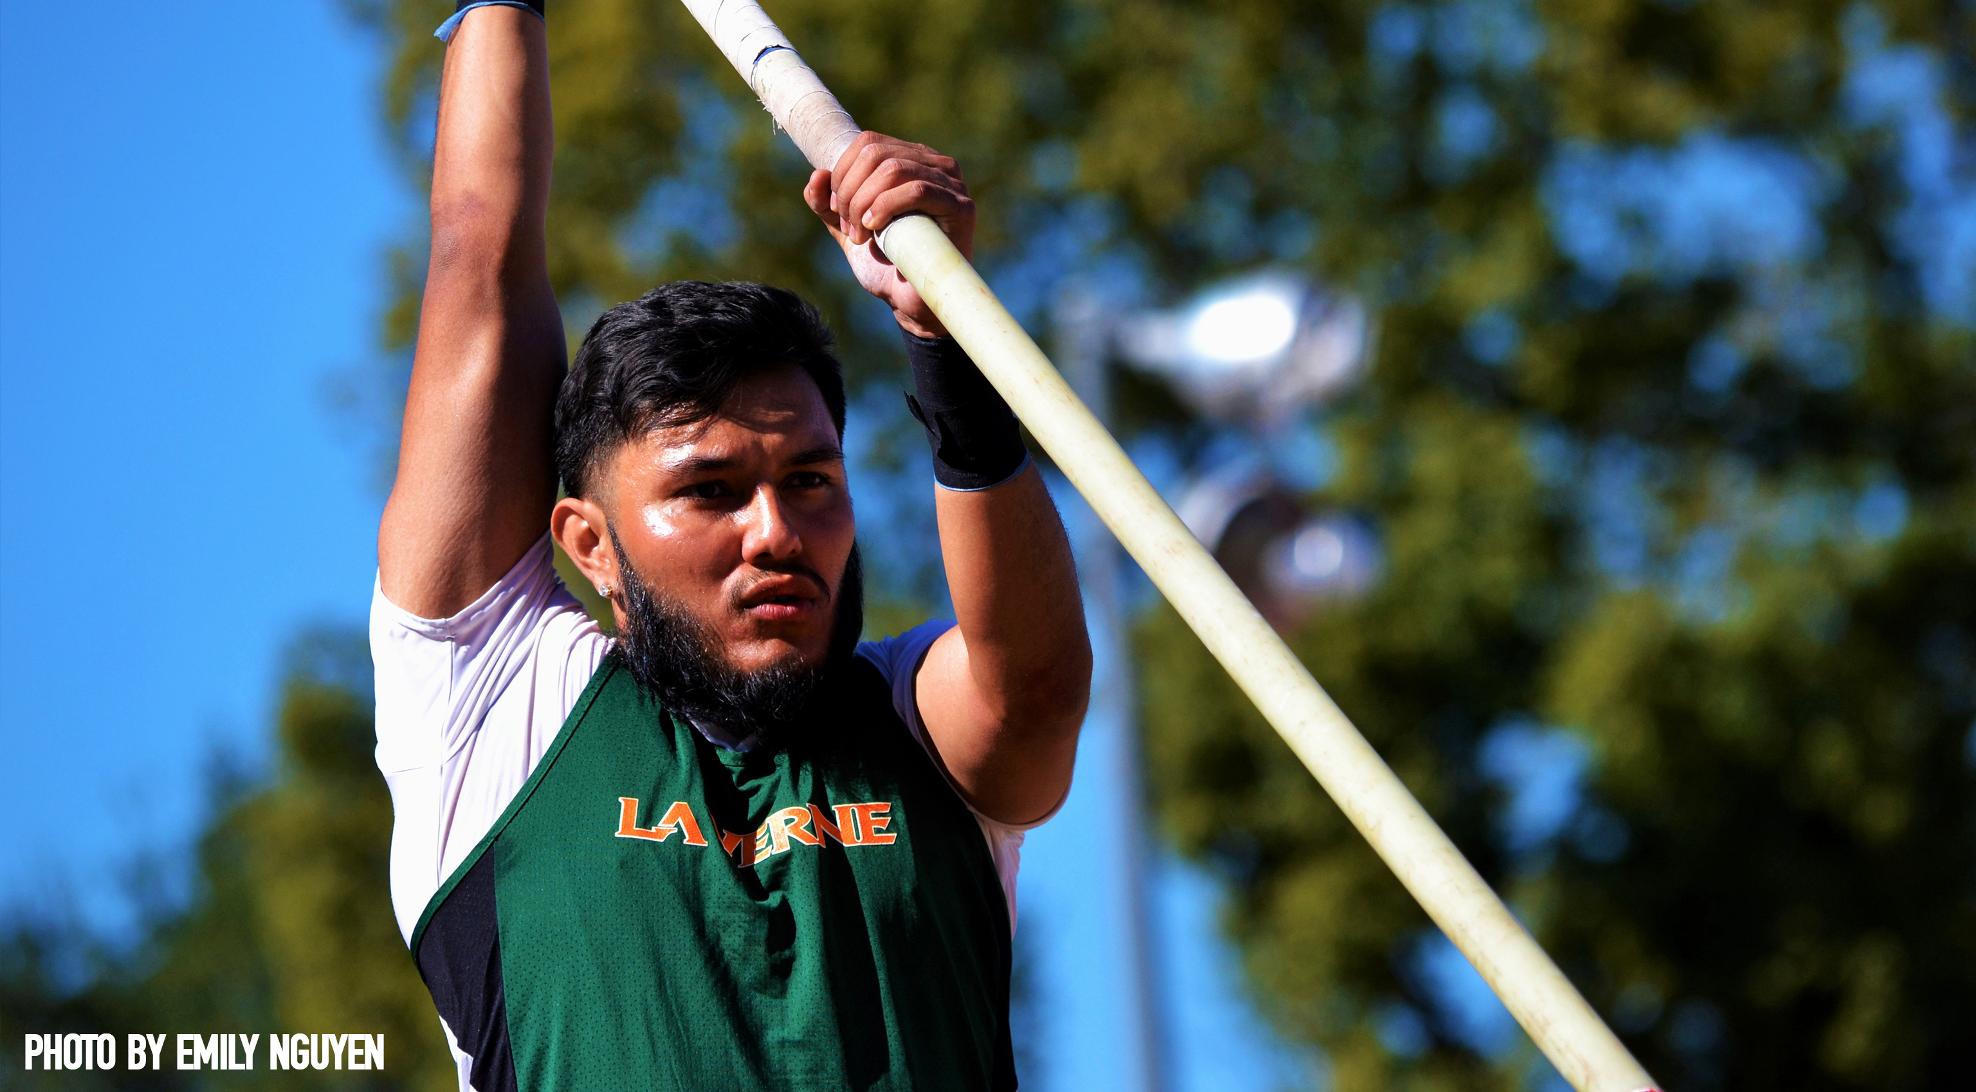 Track and Field kicks off season at Caltech All-Comers